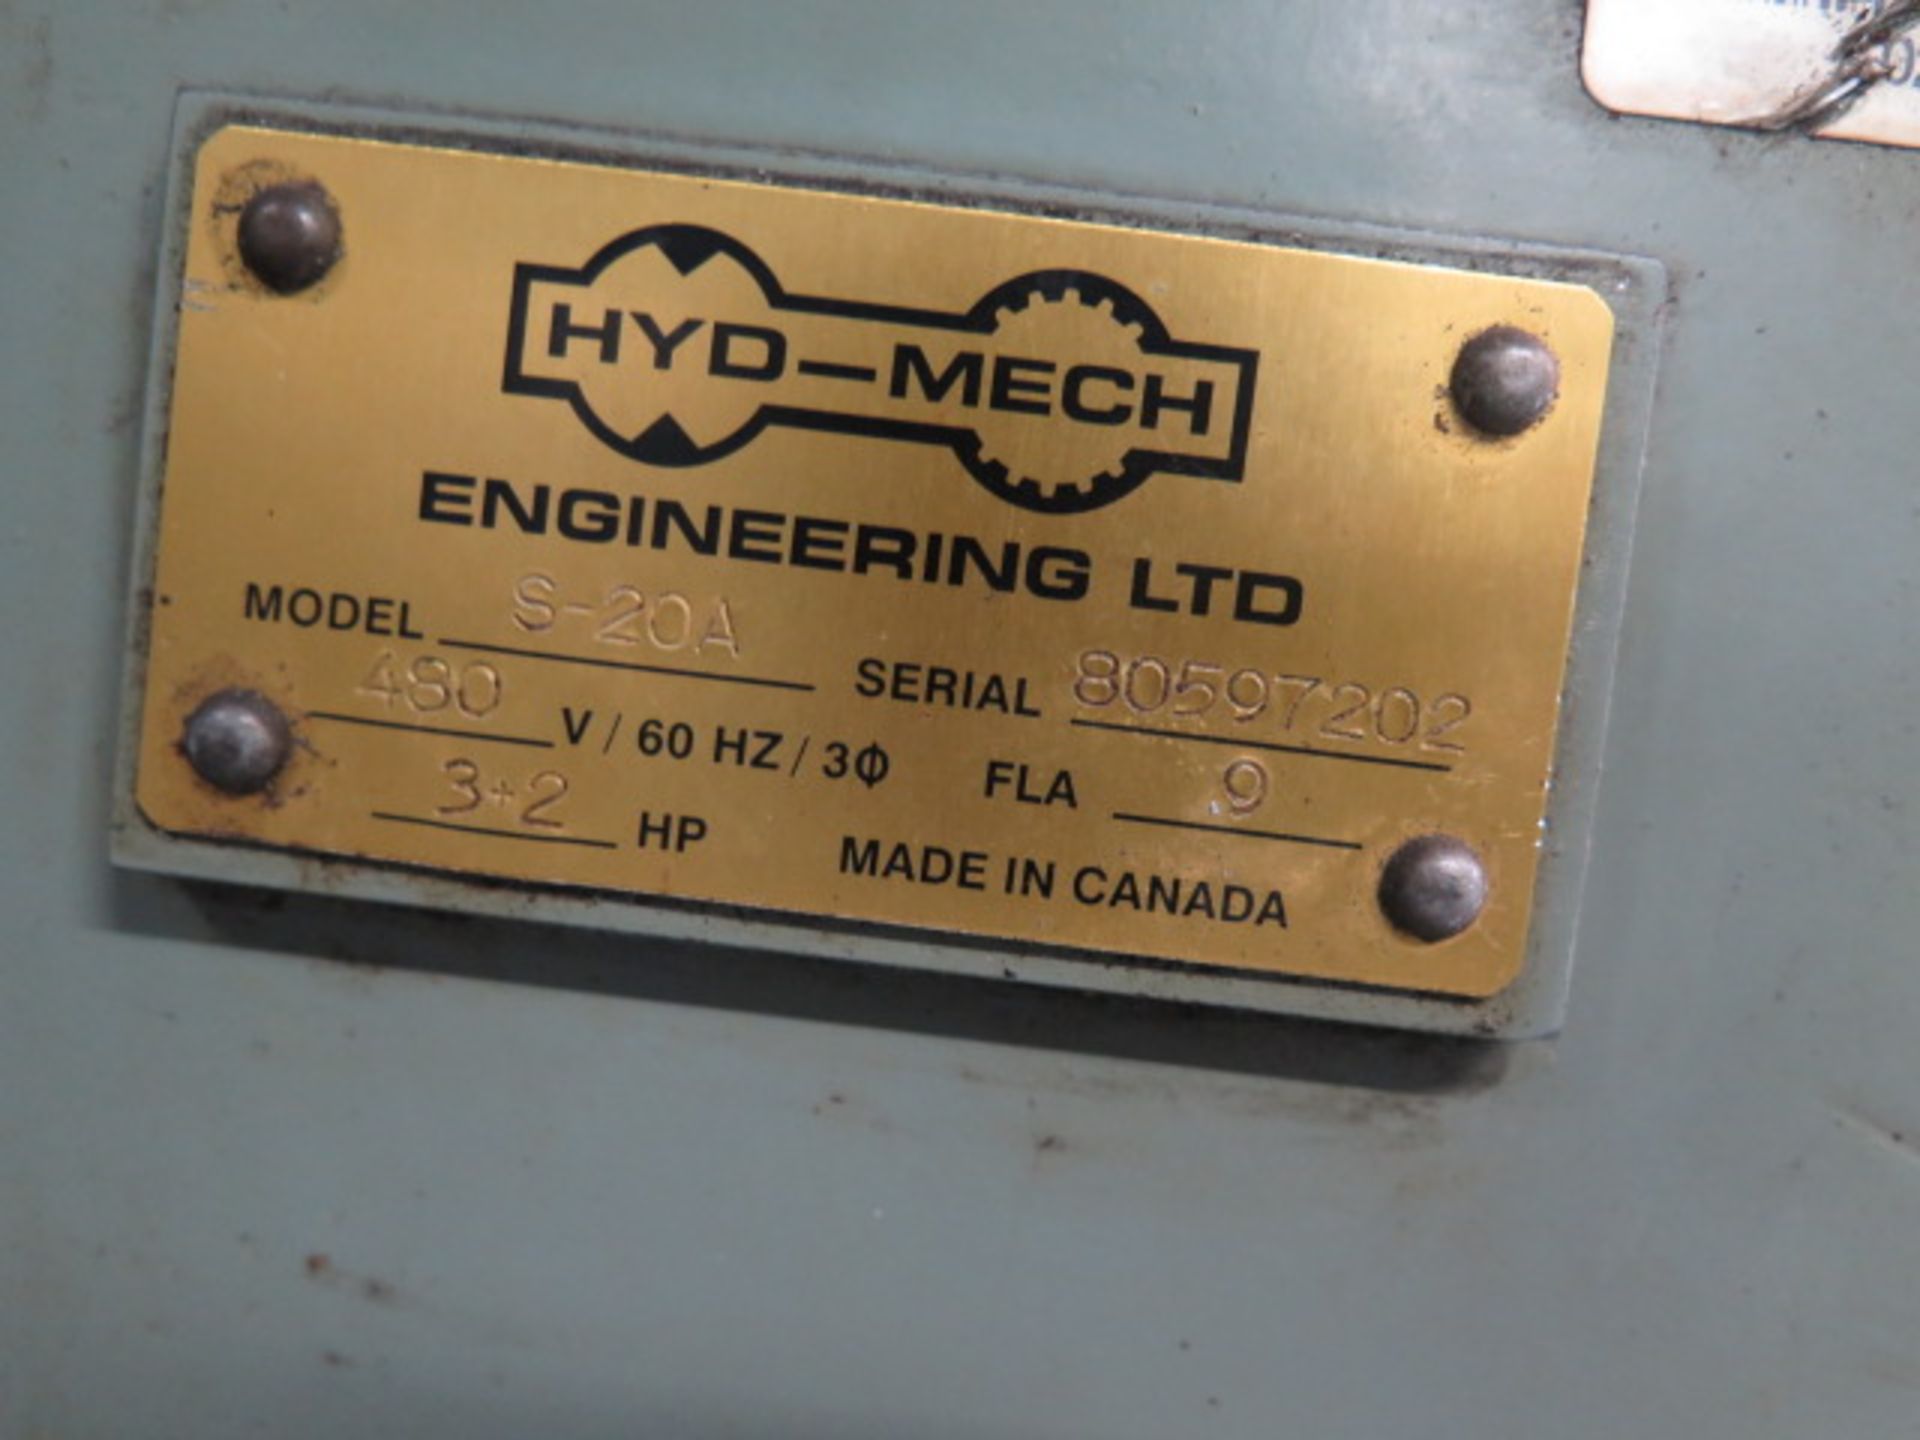 Hyd-Mech S-20A 12” Automatic Hydraulic Horizontal Miter Band Saw s/n 80597202, SOLD AS ISS - Image 12 of 12